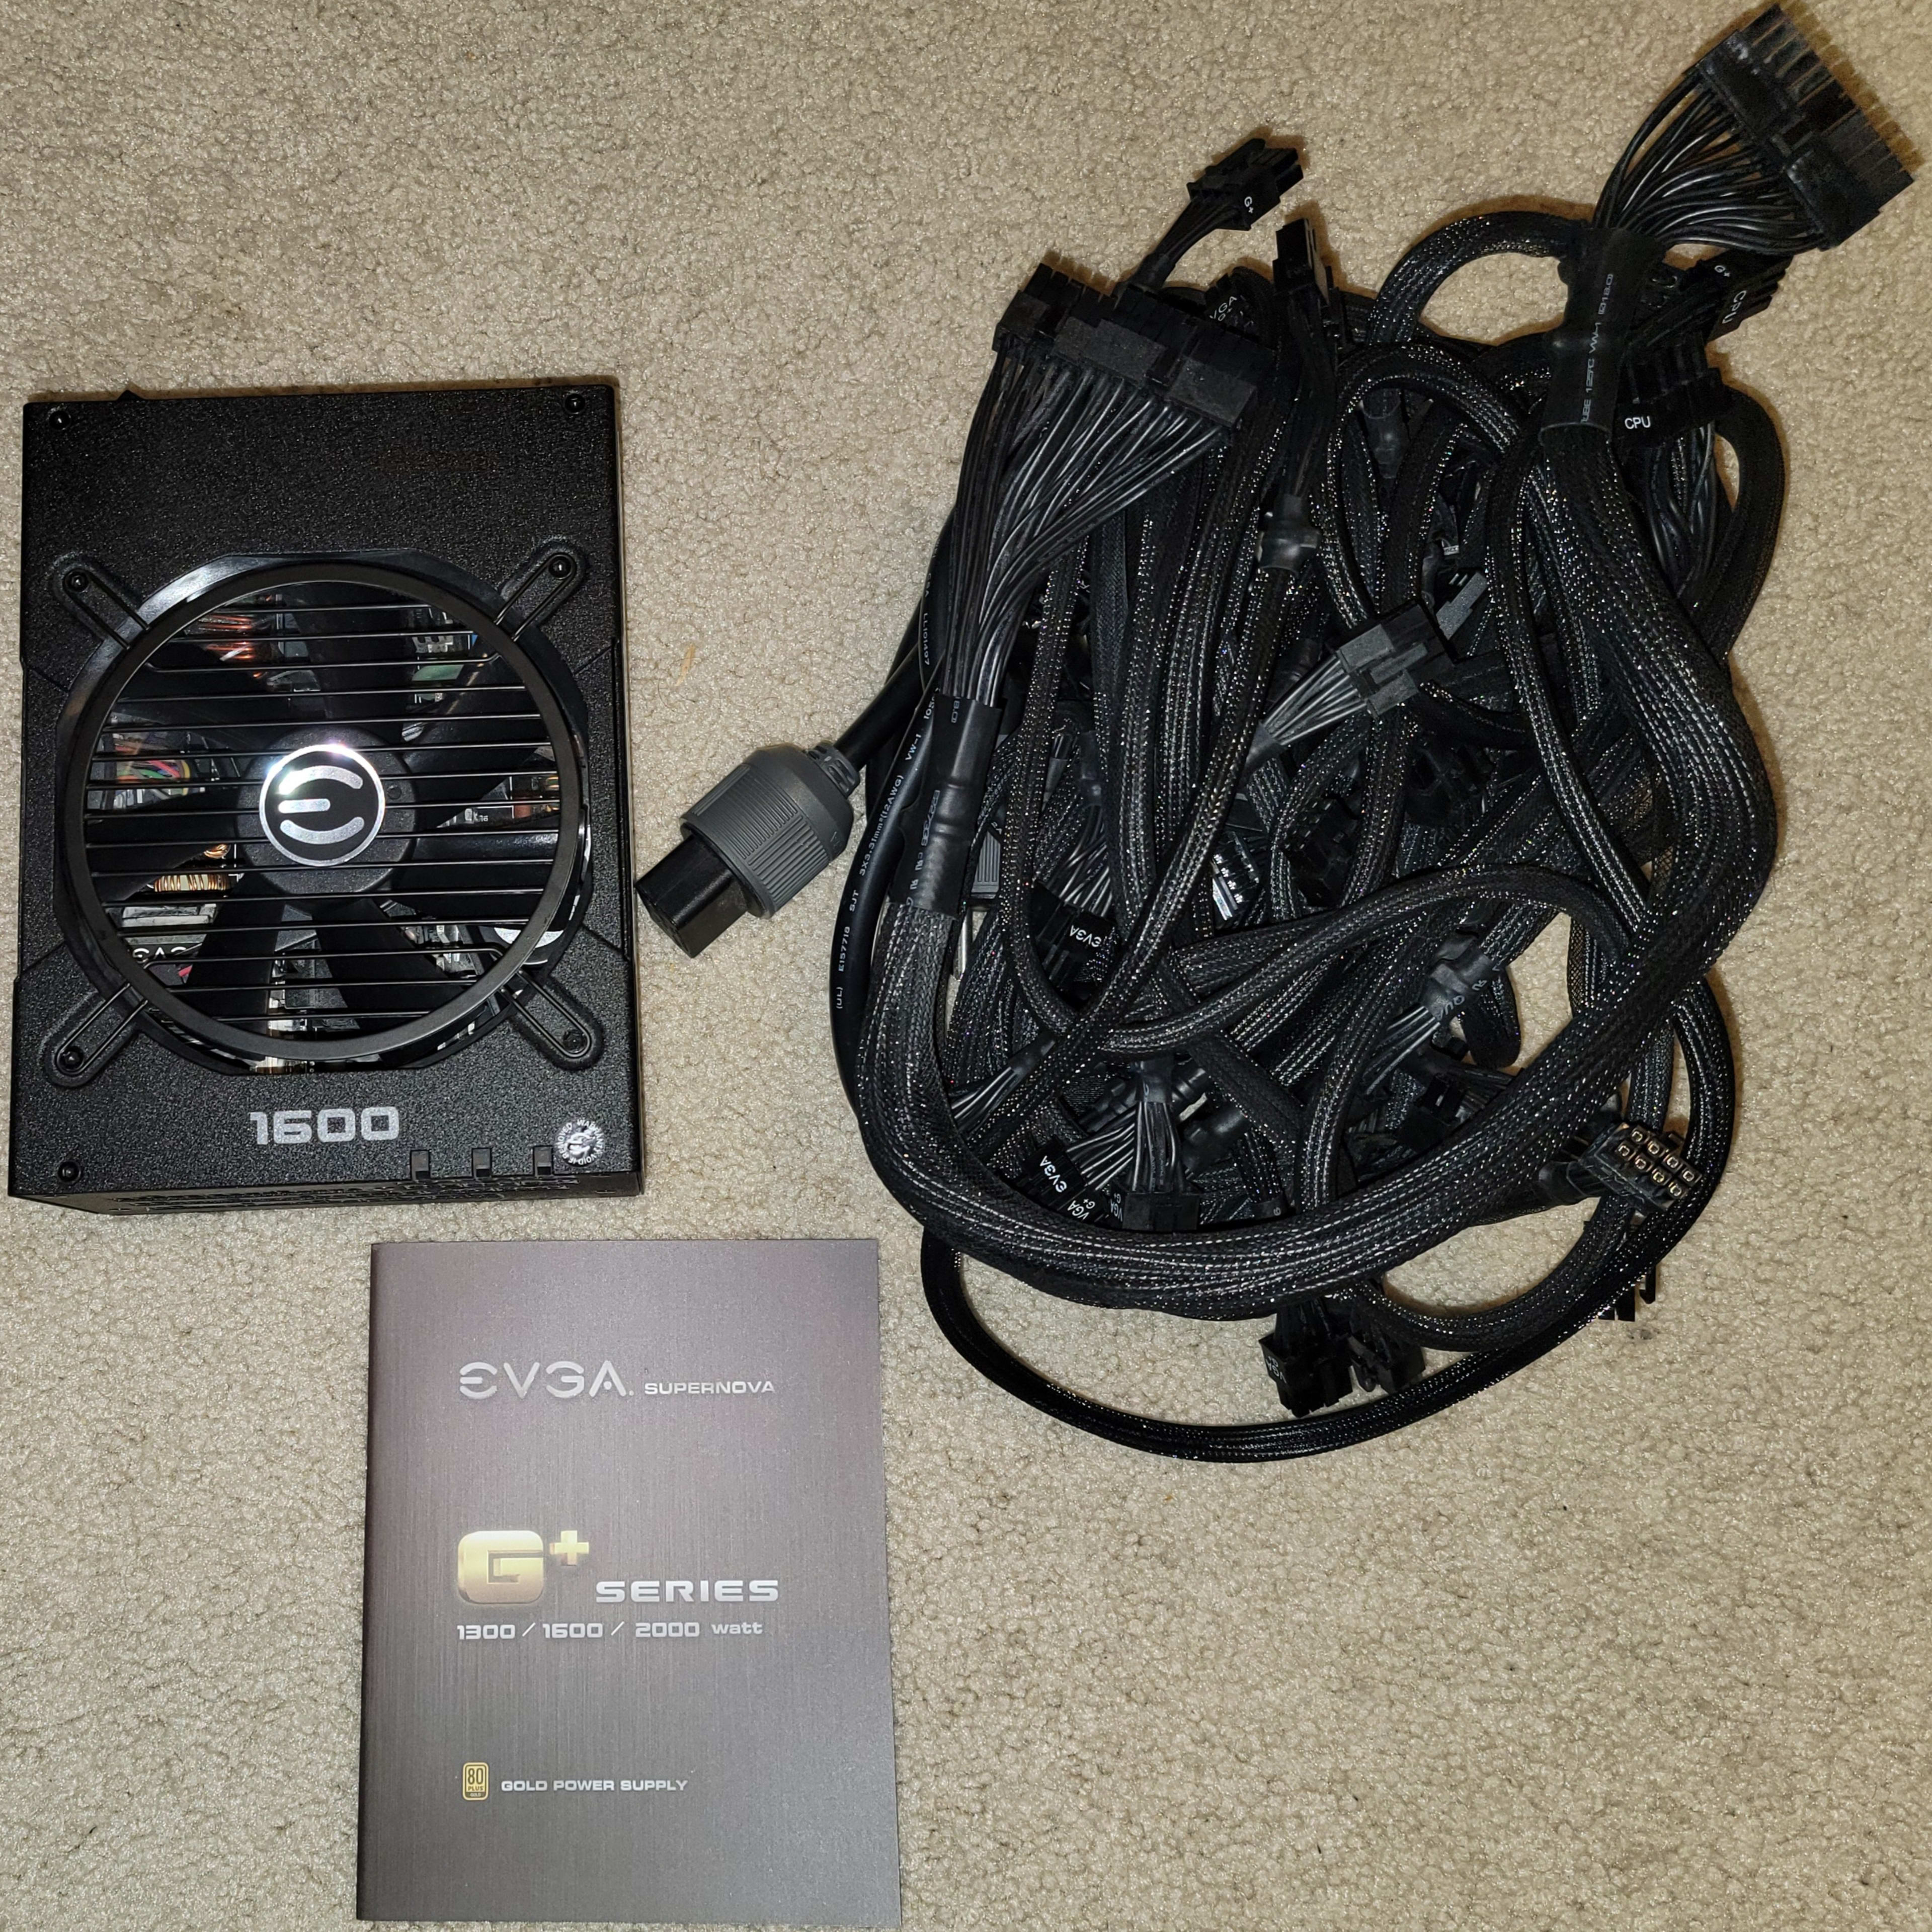 EVGA Supernova 1600W G+ 80+ Gold Fully Modular Power Supply Like New With Original Box & All Cables